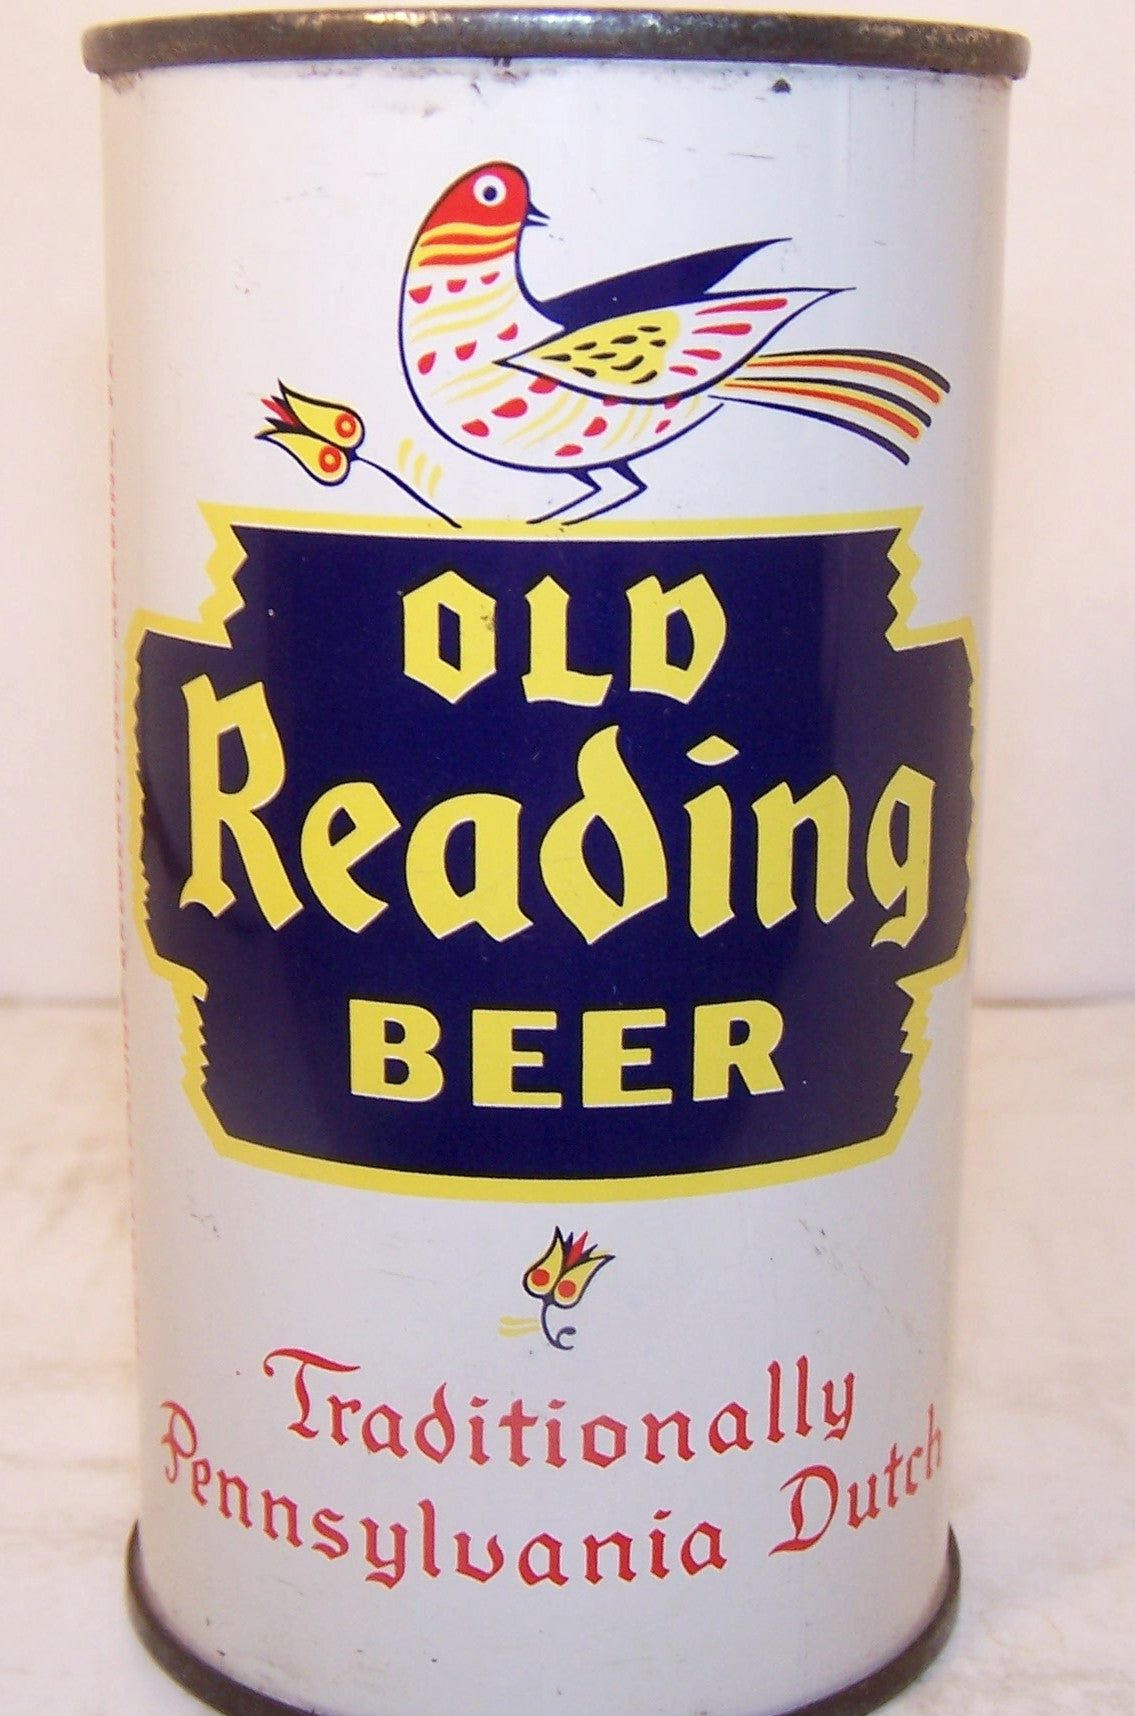 Old Reading Beer, USBC 108-3, Grade 1 to 1/1+ Sold 1/15/15